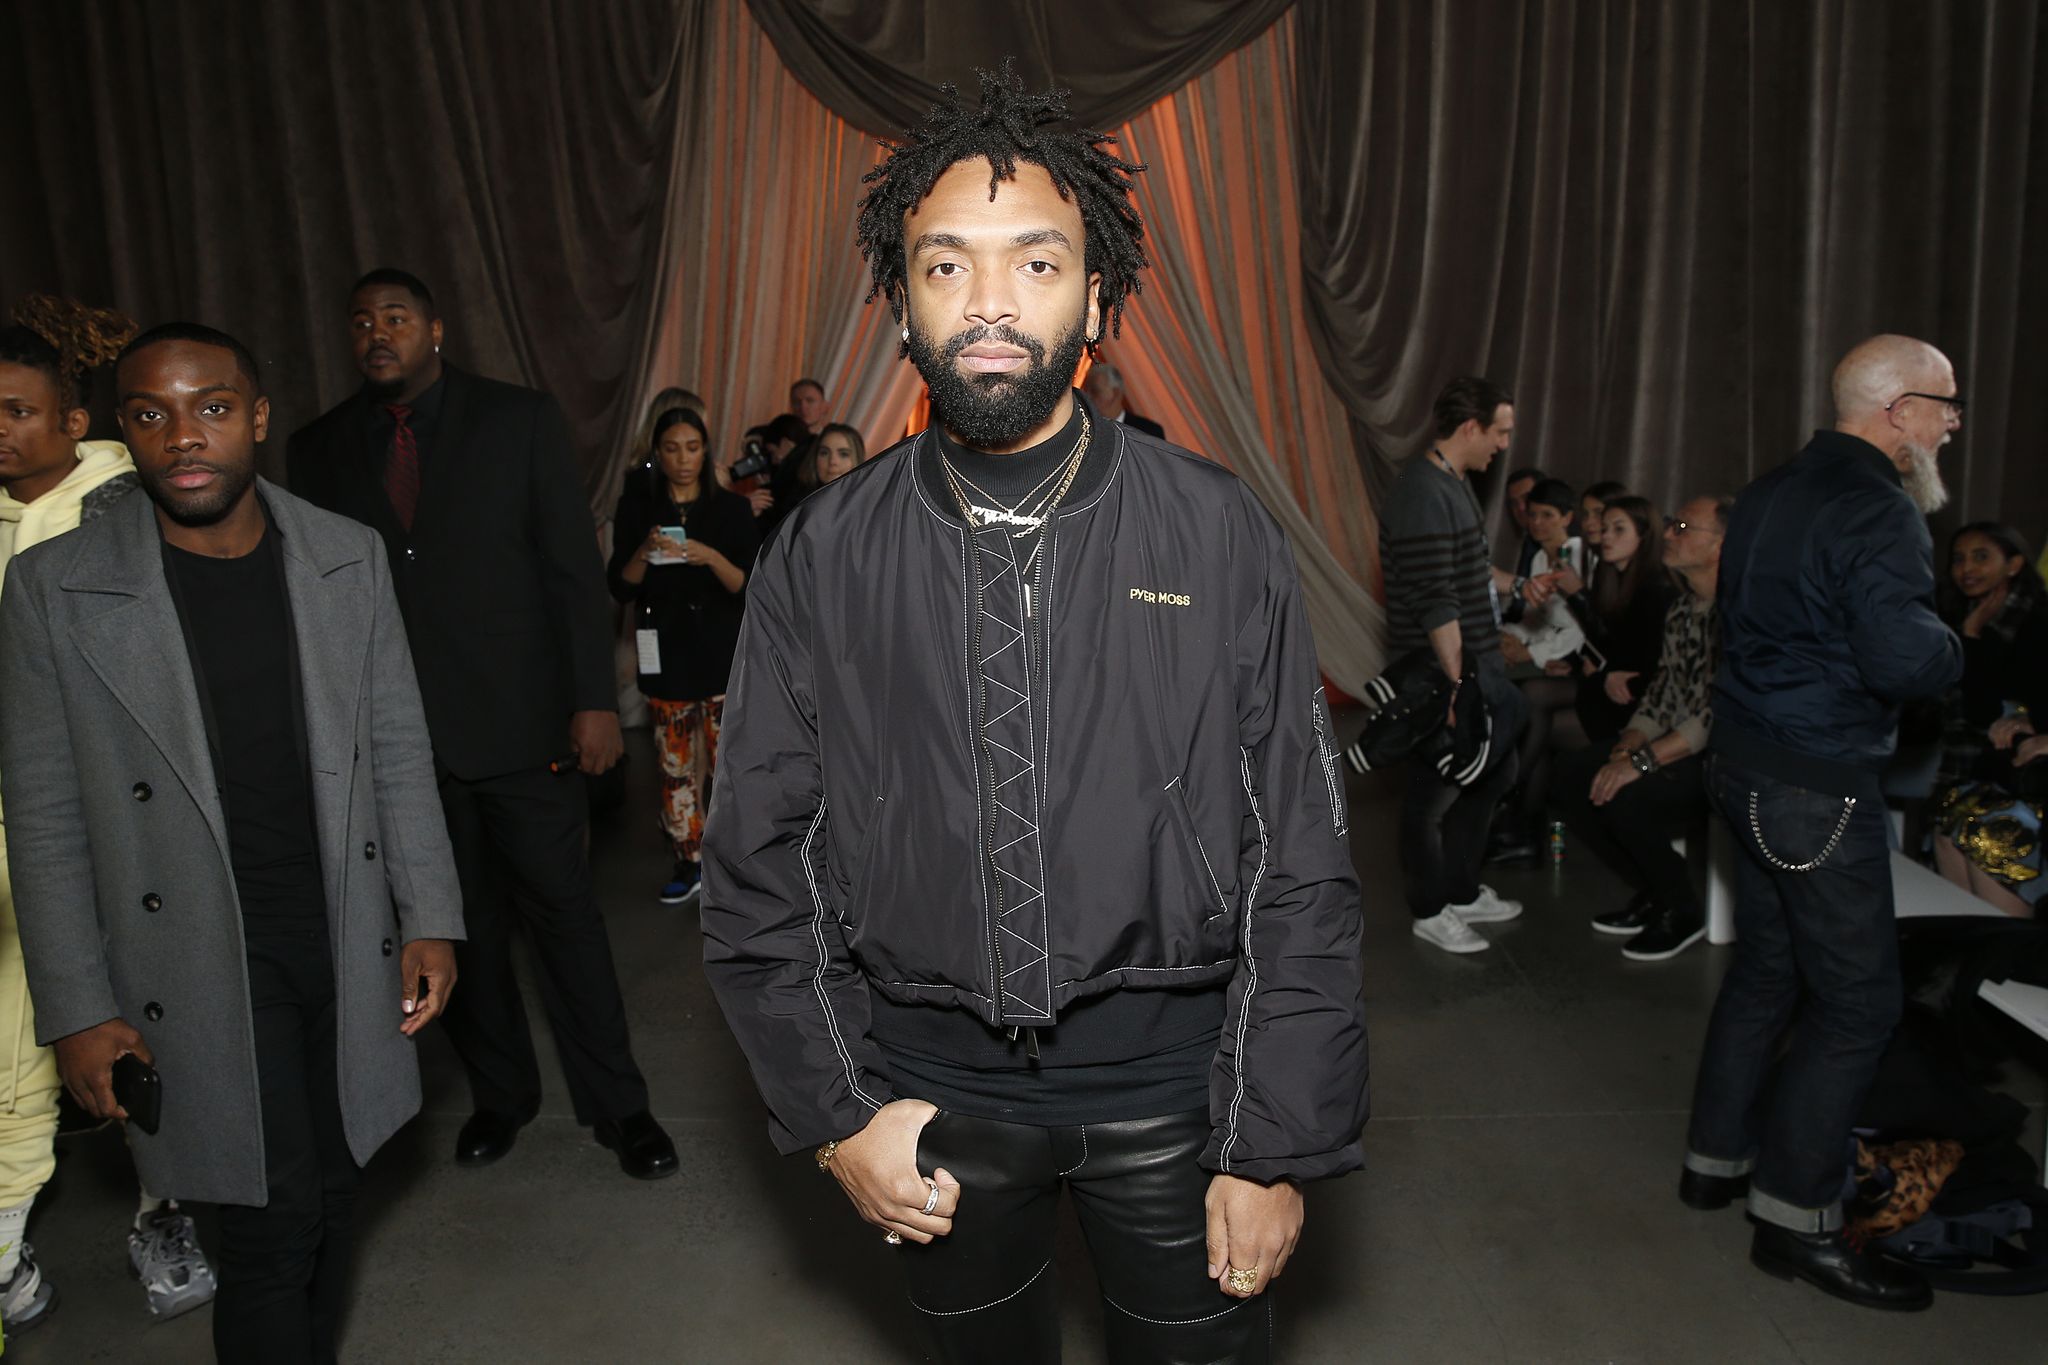 Who is Kerby Jean-Raymond, founder of Pyer Moss?